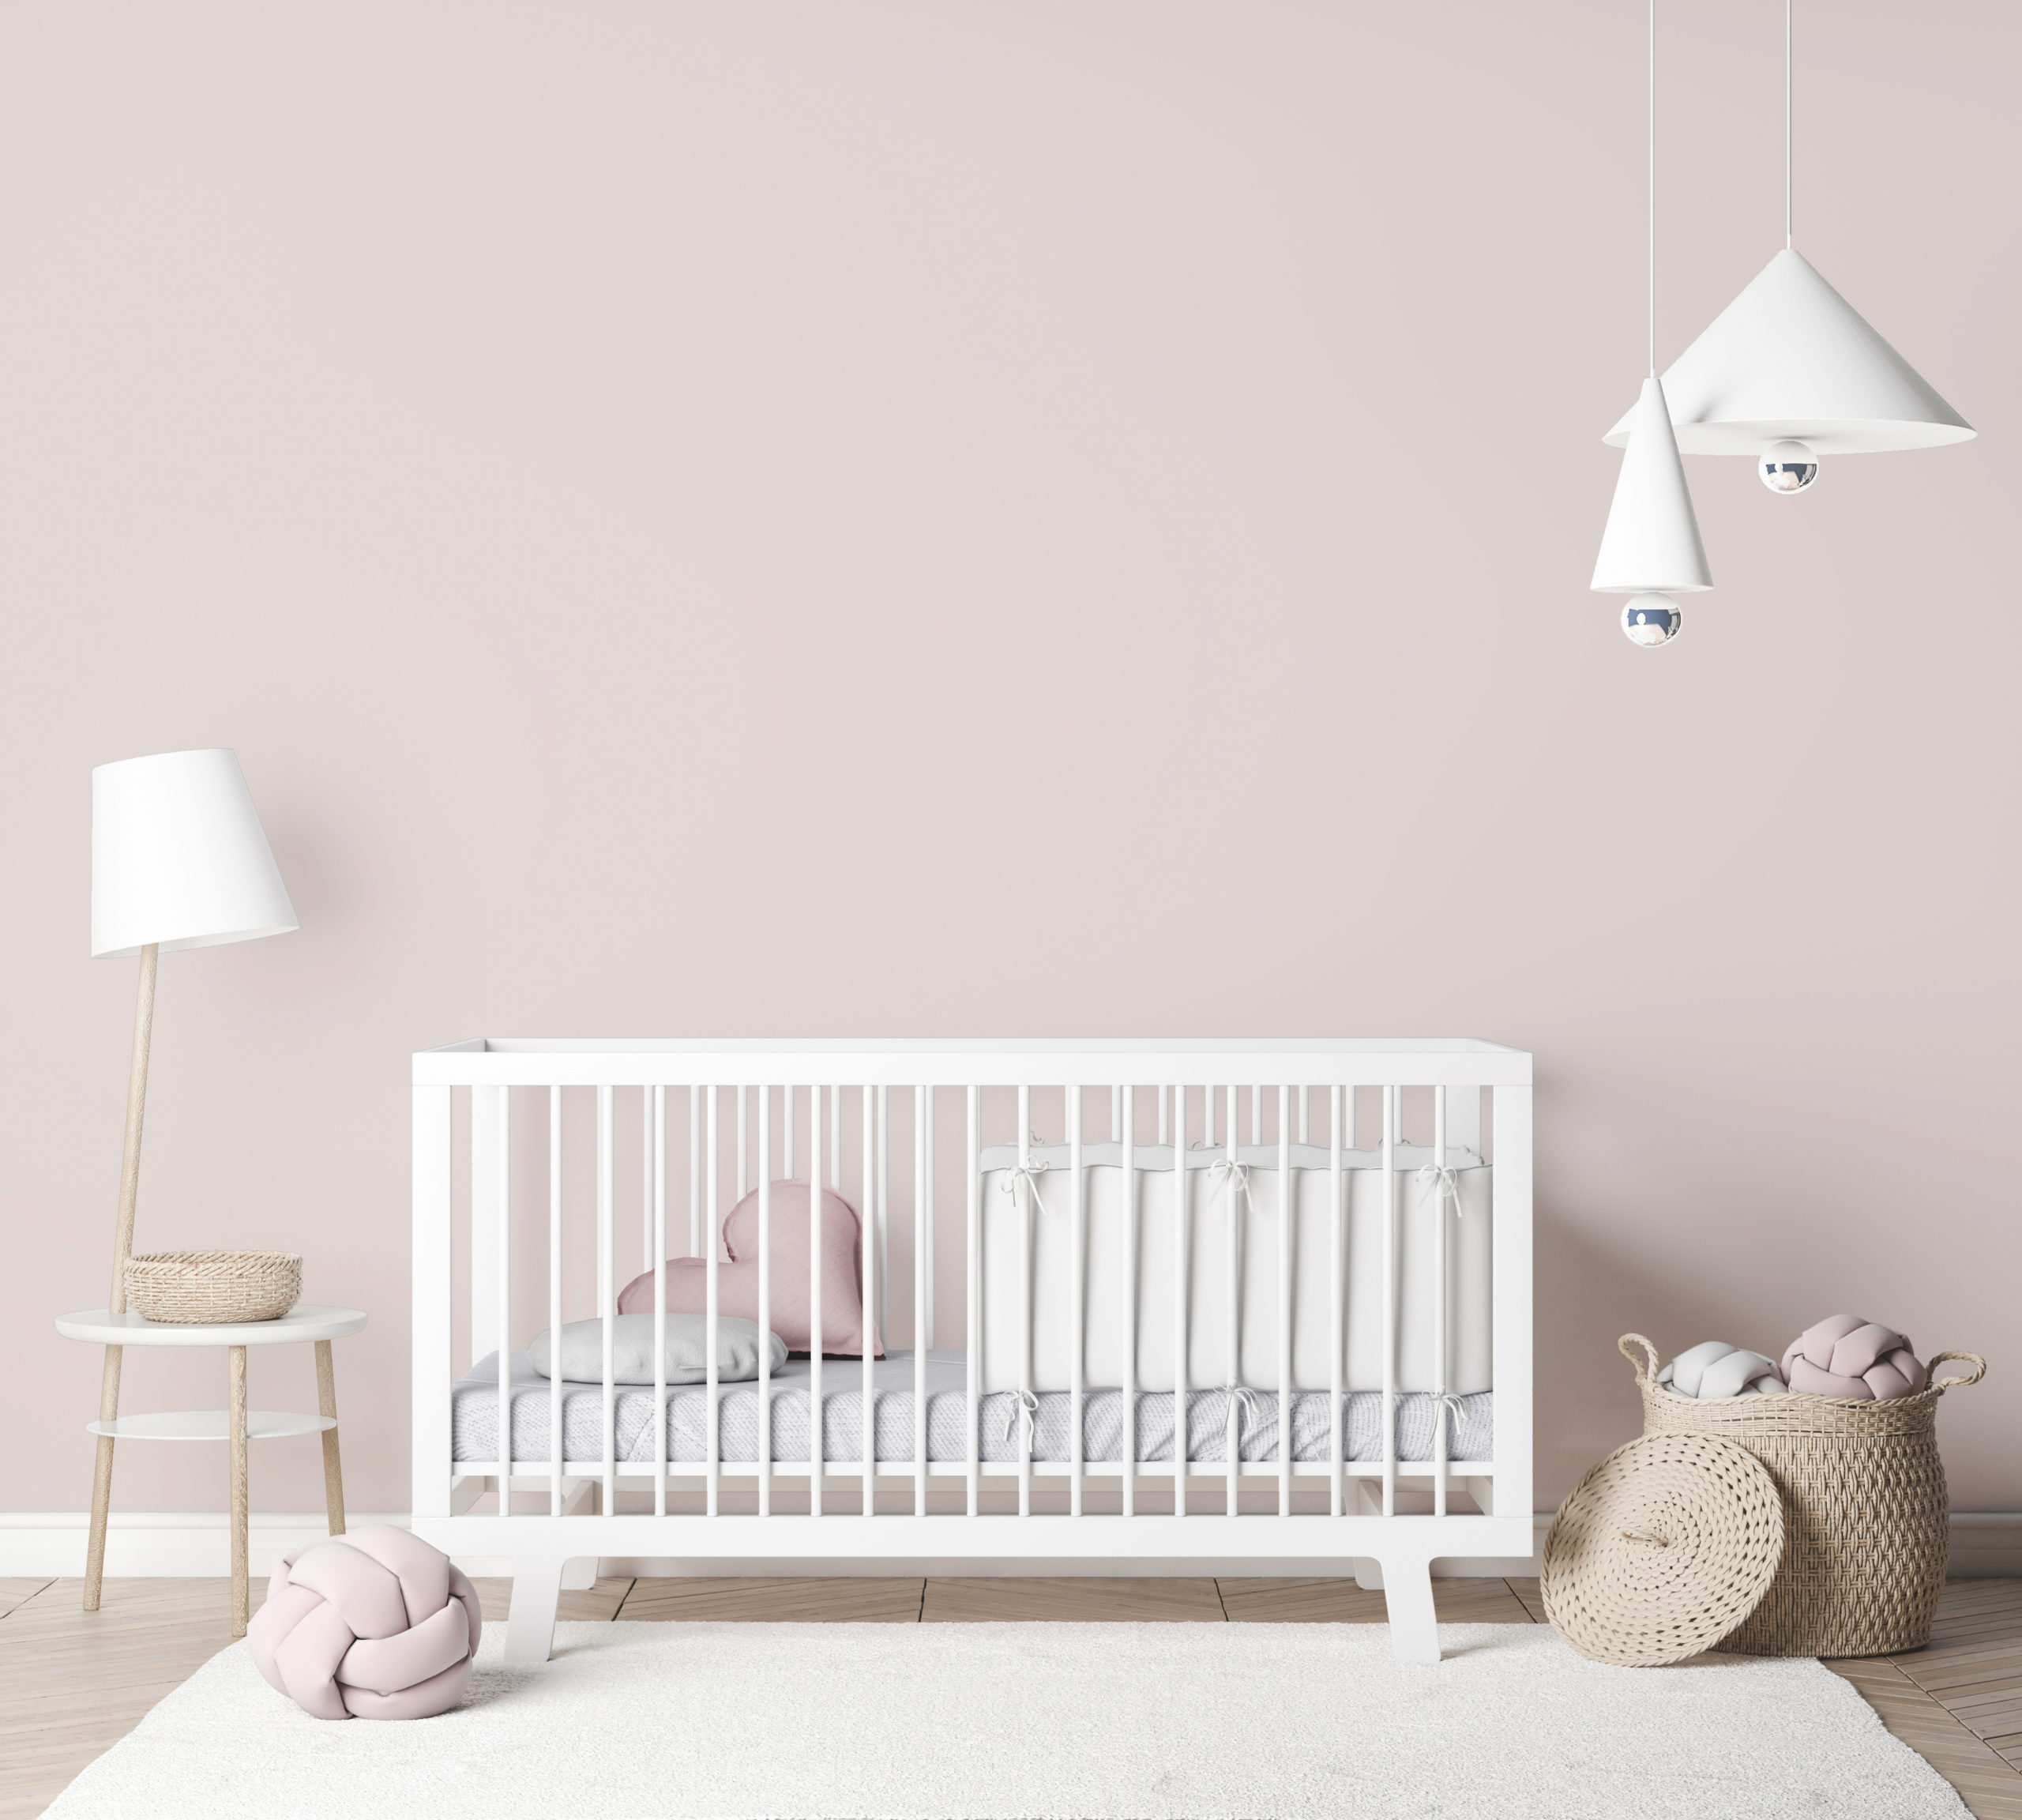 The Most Essential Nursery Ideas and Tips for New Parents